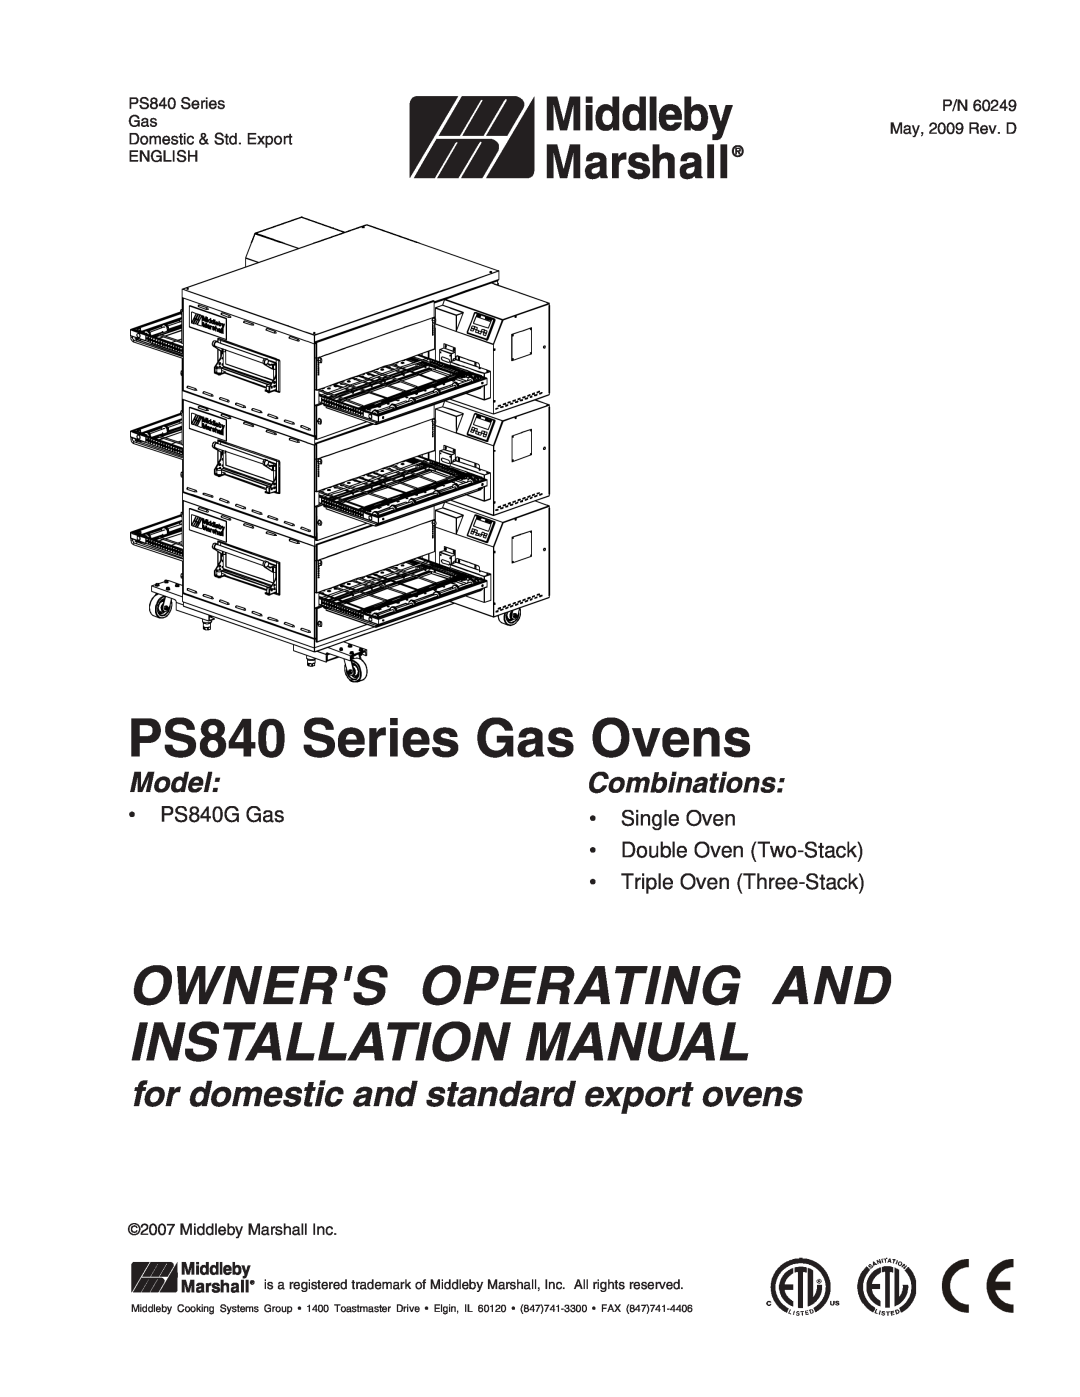 Middleby Marshall installation manual PS840 Series Gas Ovens, Owners Operating And Installation Manual, Model 